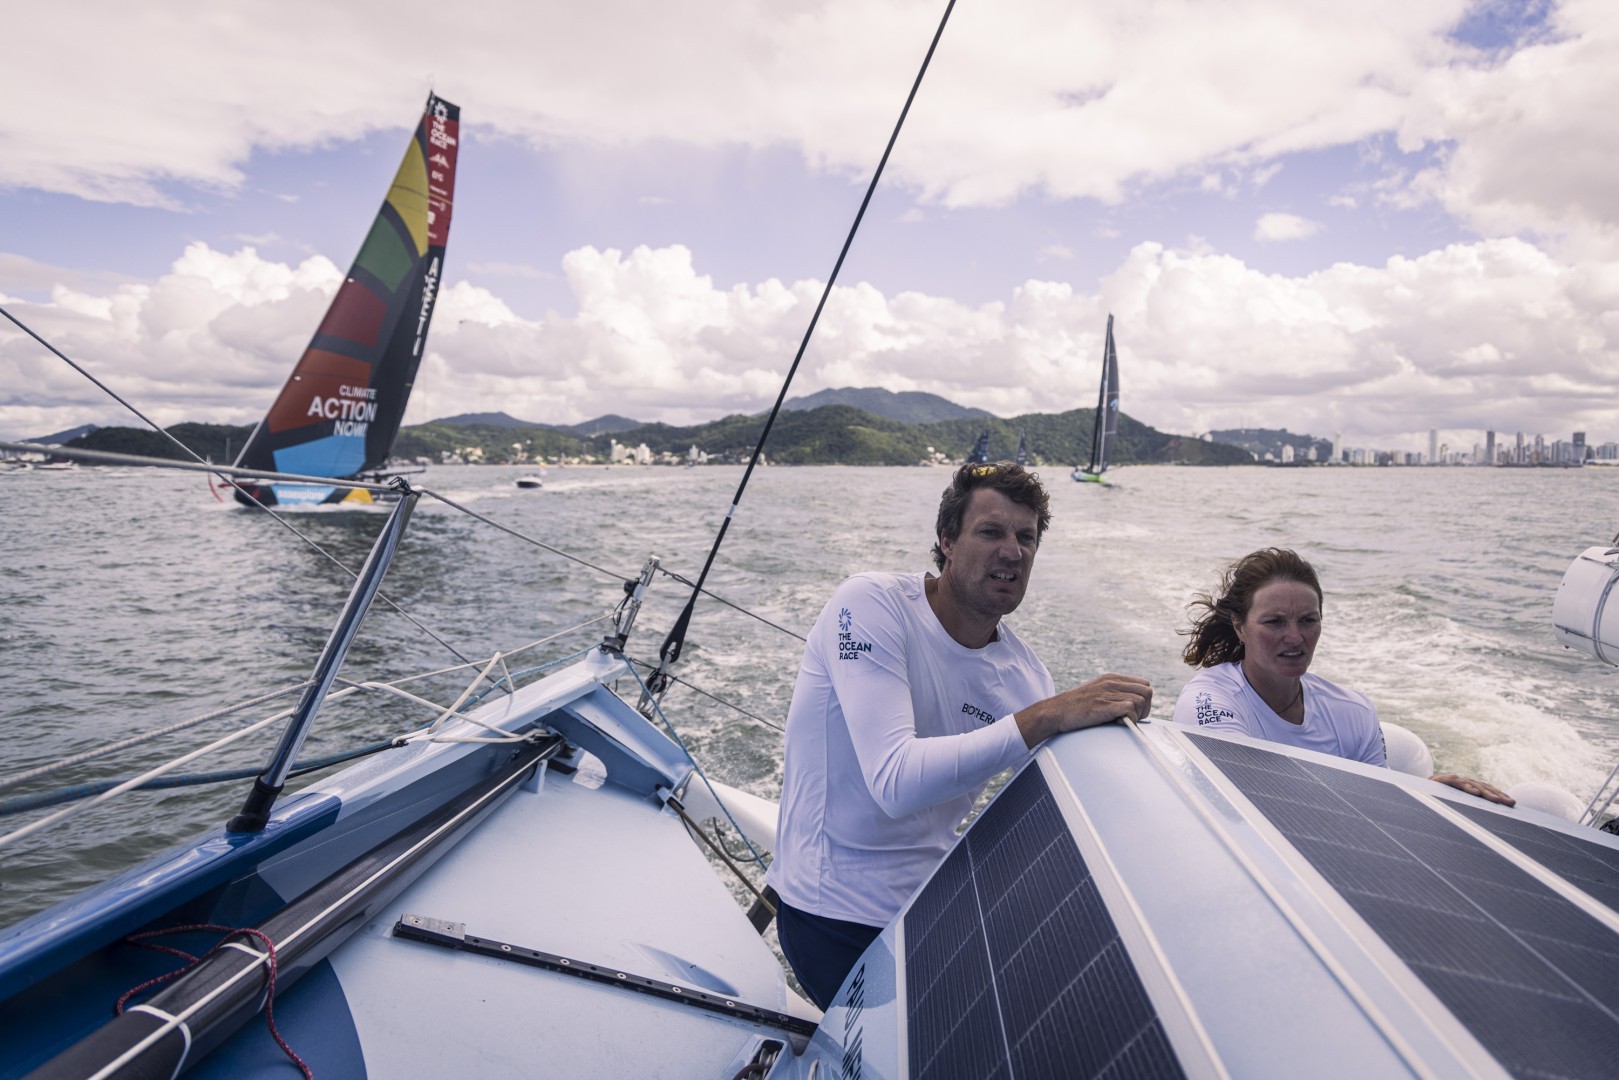 The Ocean Race 2022-23 - 23 April 2023, Leg 4 onboard Biotherm. Skipper Paul Meilhat and Marie Riou with Team Malizia and Team Holcim - PRB behind as they leave Itajaí.
© Anne Beauge / Biotherm / The Ocean Race